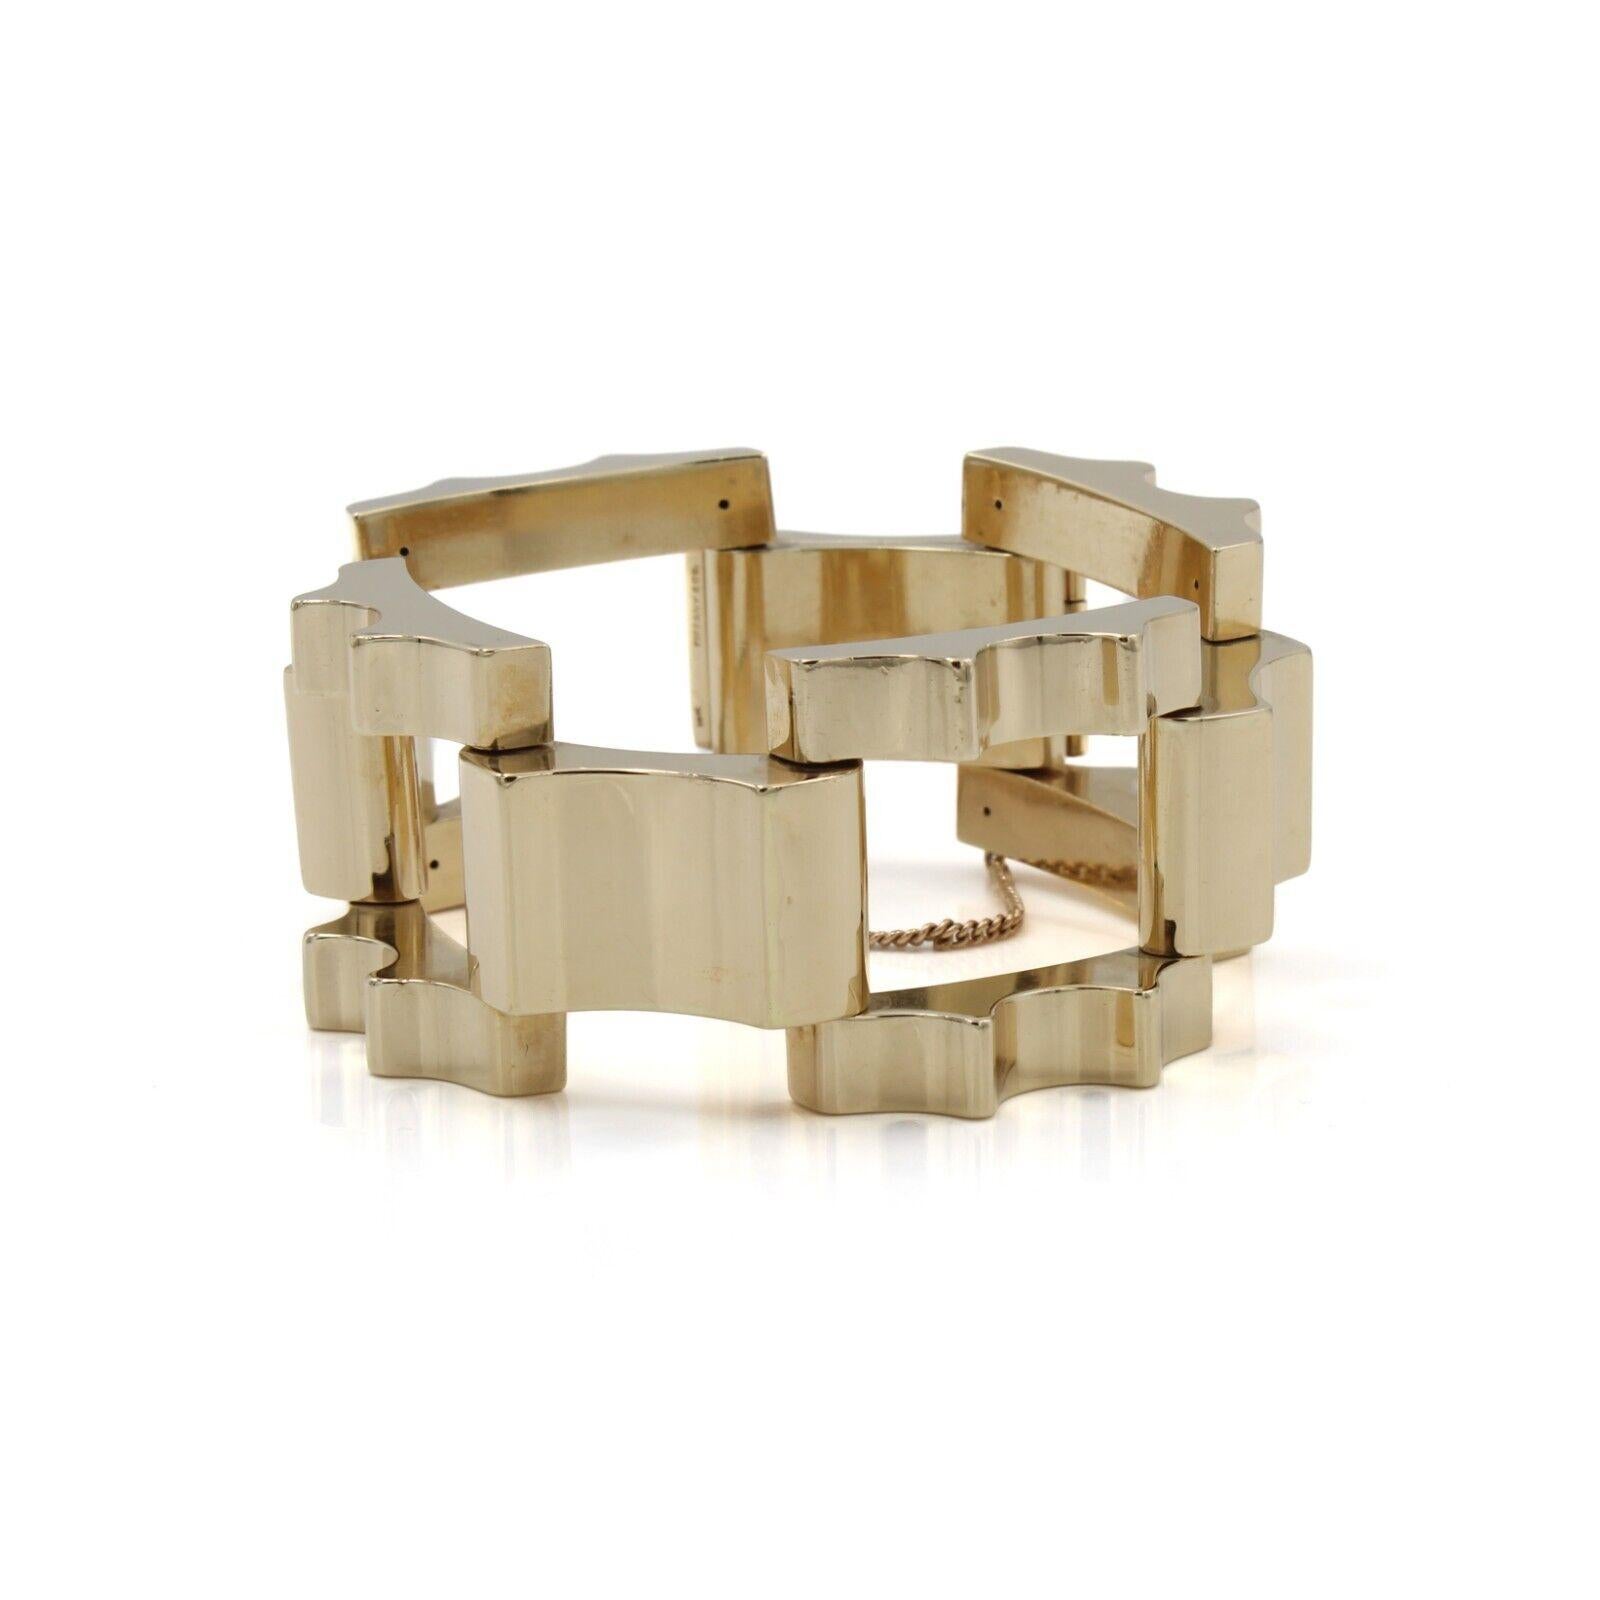 Tiffany & Co. Retro 14k Yellow Gold Tank Bracelet Circa 1950s

Here is your chance to purchase a beautiful and highly collectible designer bracelet.  
 
Indulge in timeless elegance with the Tiffany & Co. 14k yellow gold retro tank bracelet,